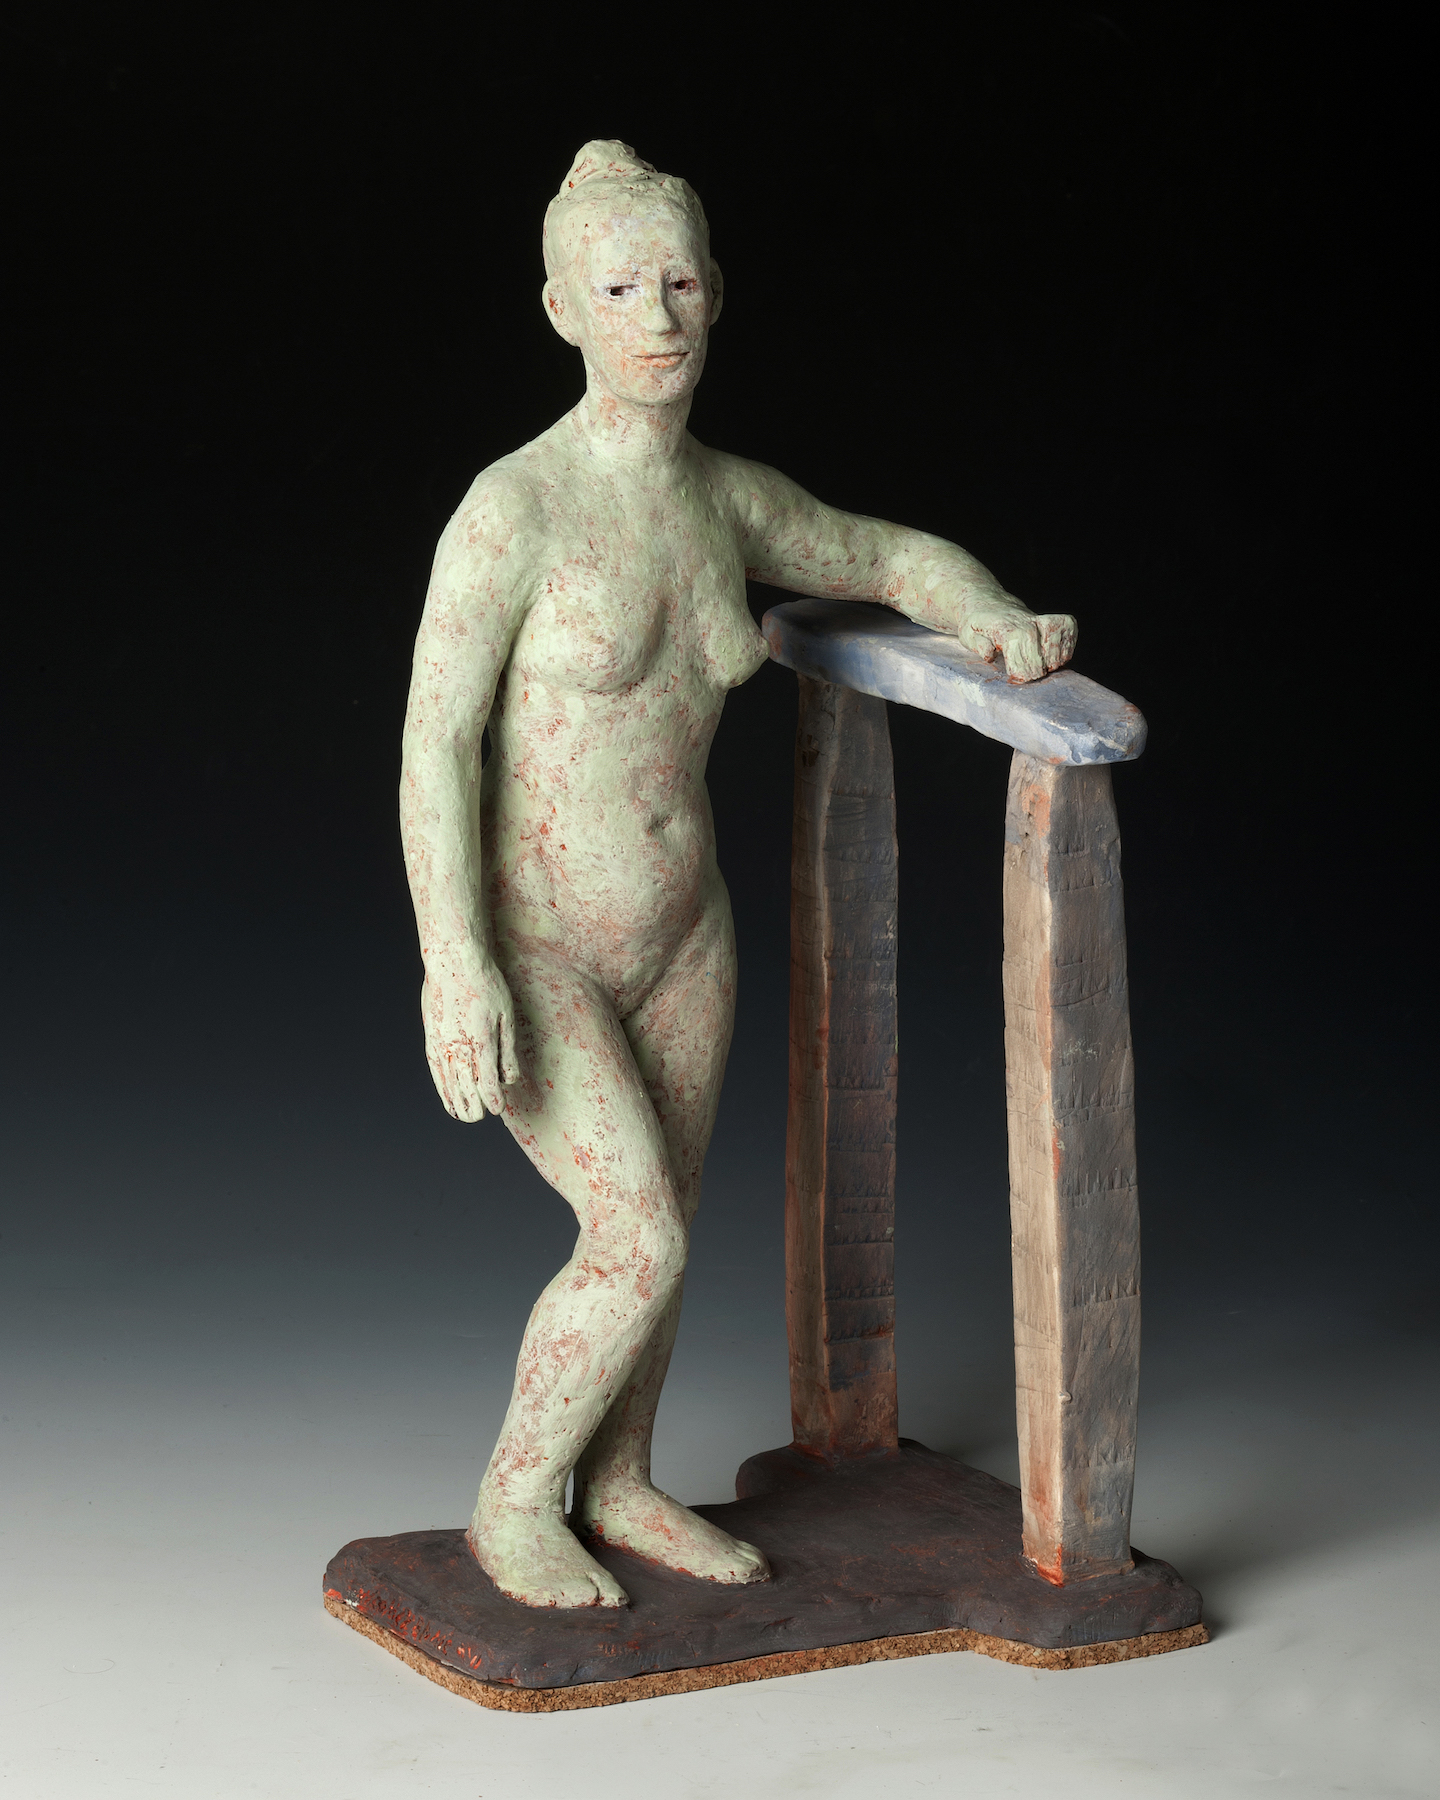 “Leaning on the Past”, polychromed terra cotta, 12”H x x 7”W x 5.5”D, 2013